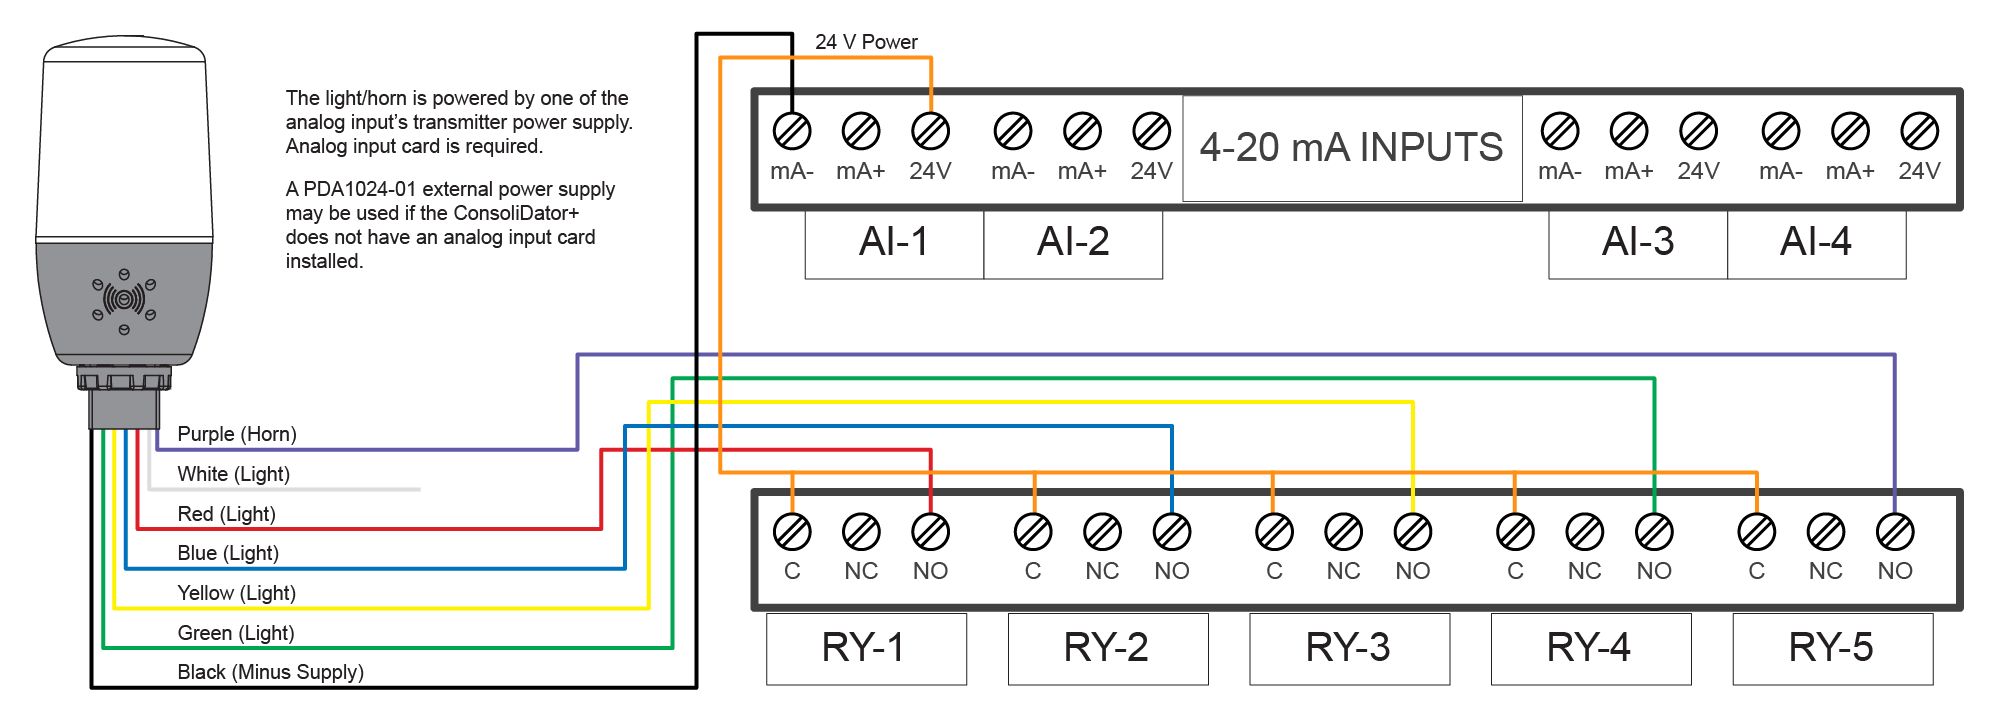 Wiring Connections for MOD-LH5C Models Using ConsoliDator+ Controller Internal Power Supply